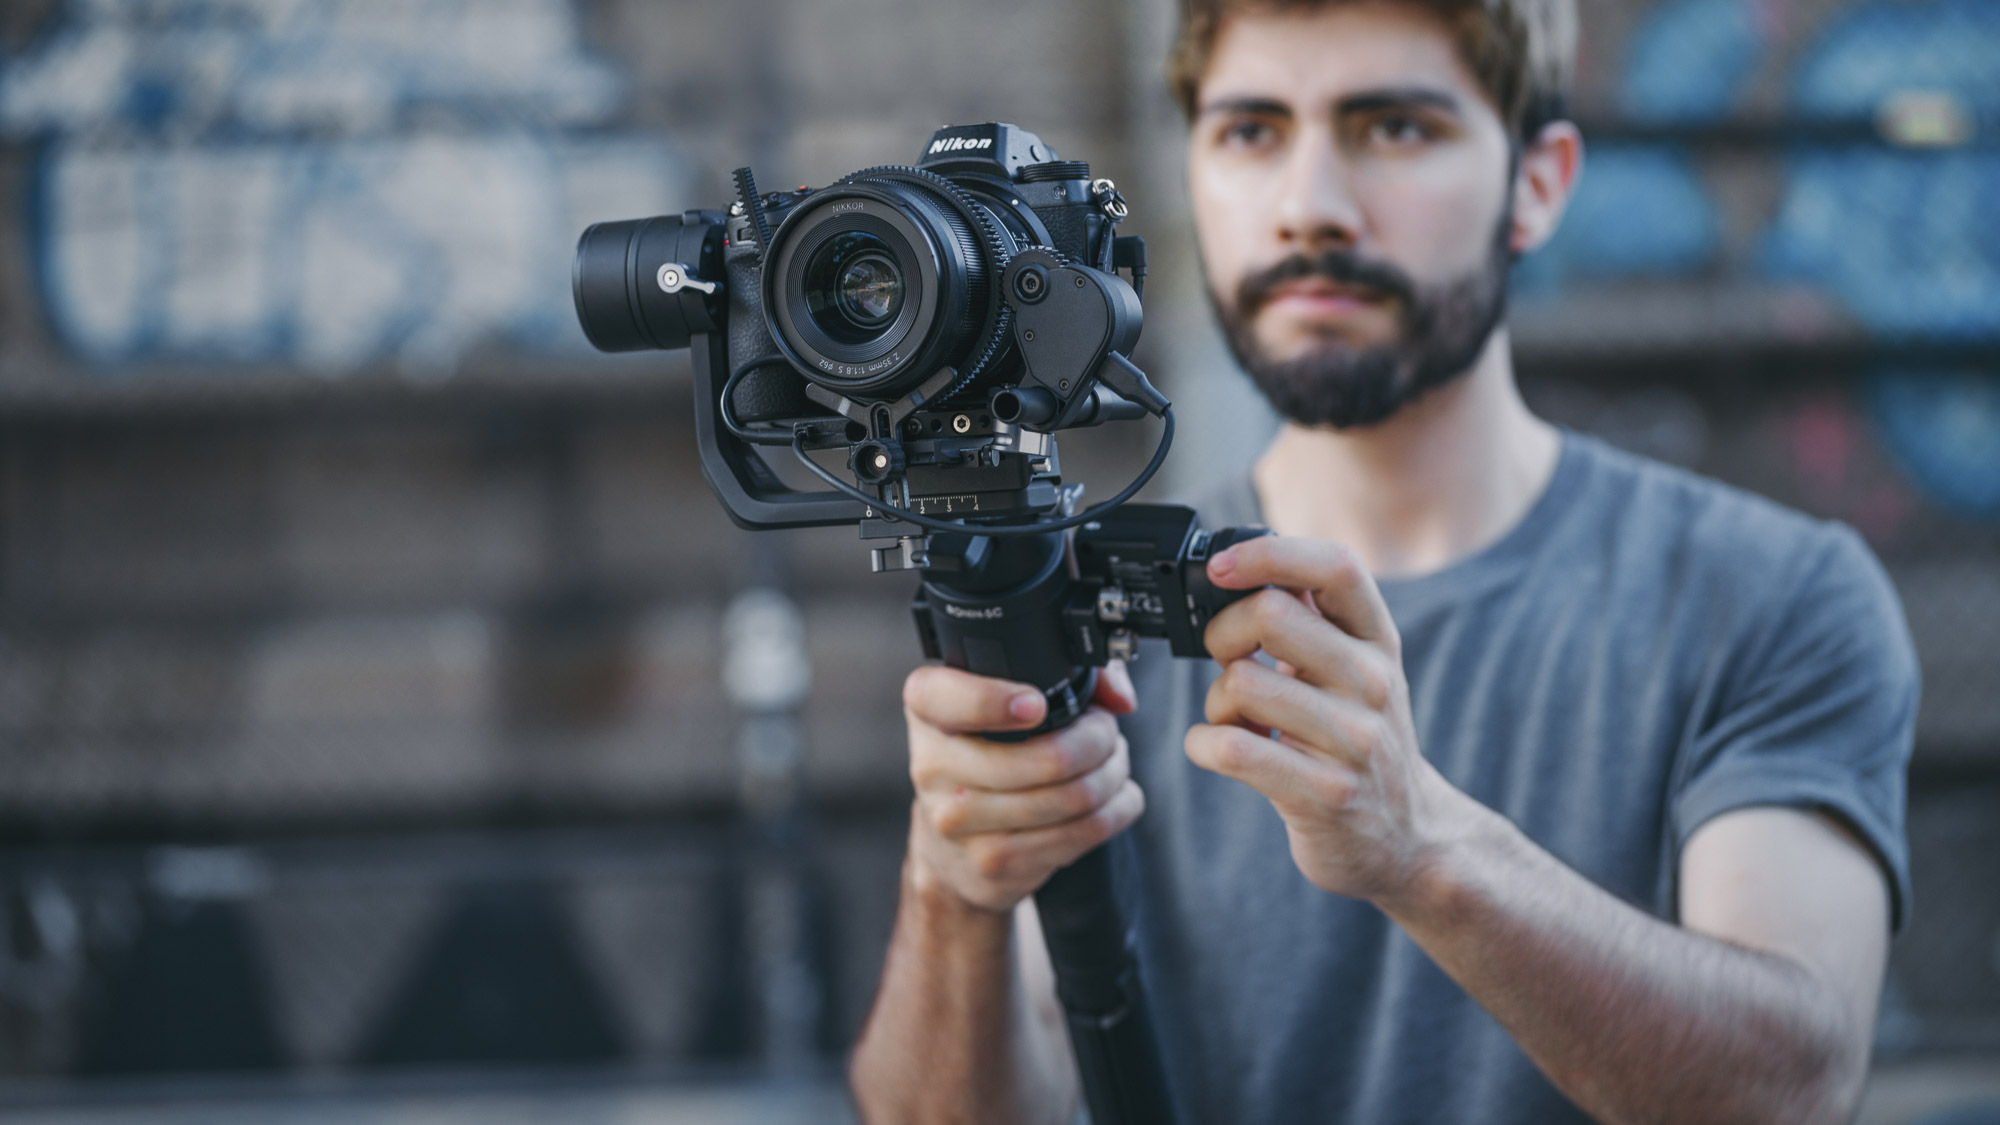 How to get a motorized gimbal for your amazing photography